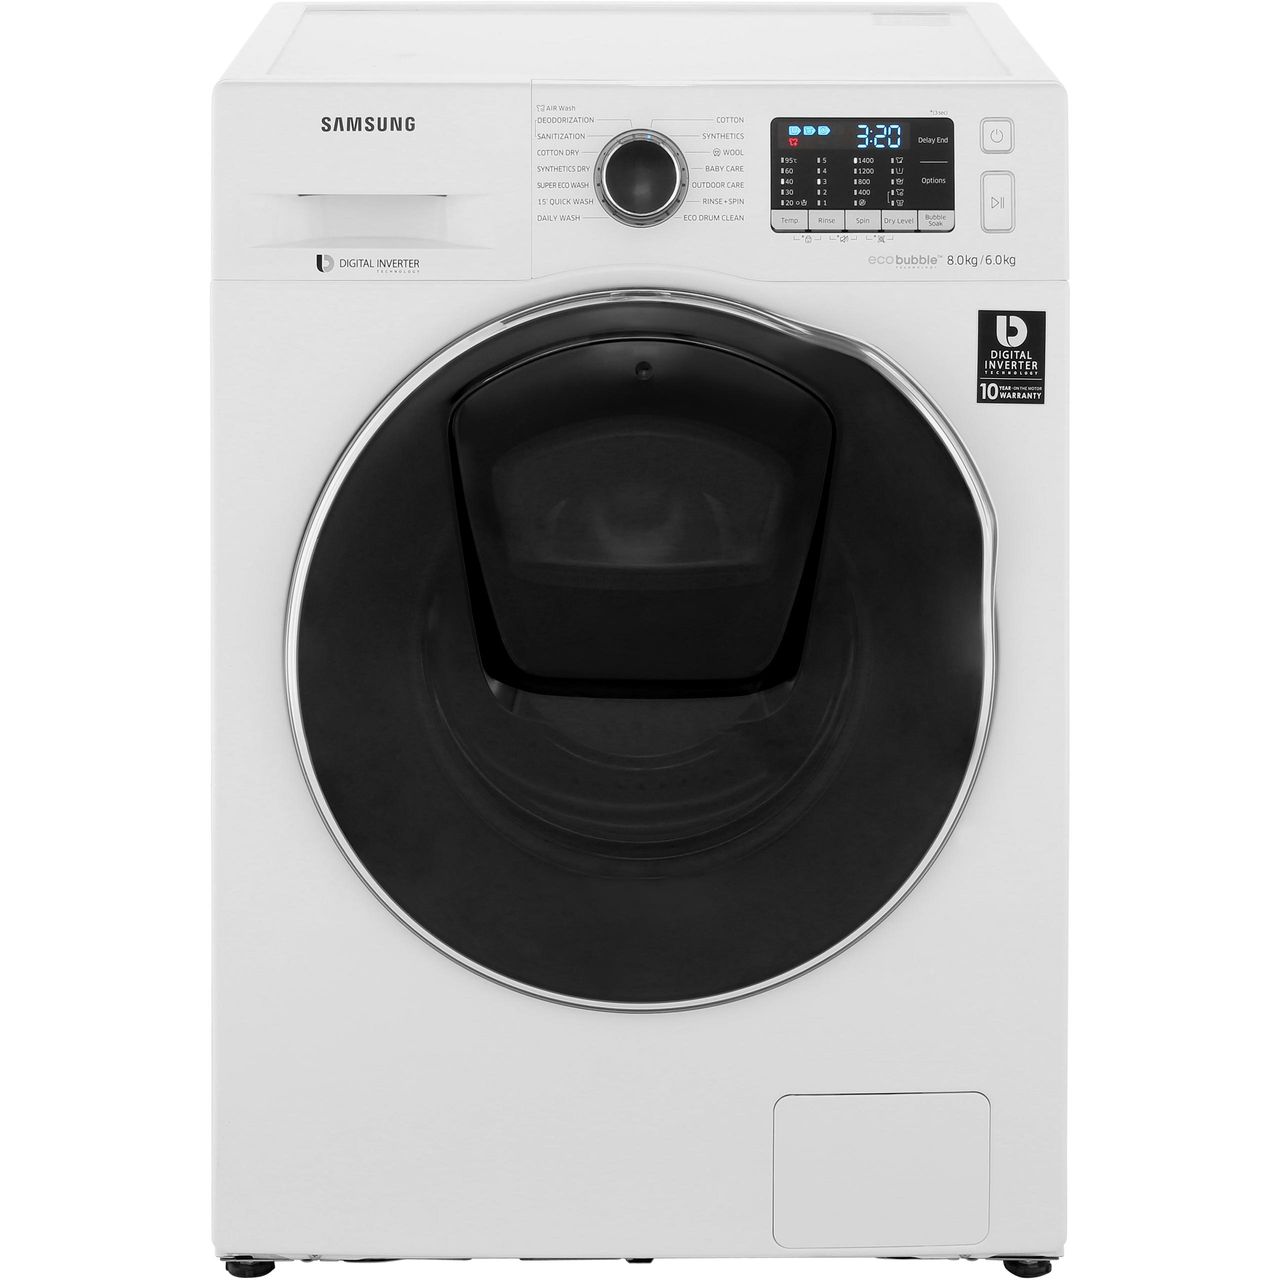 Samsung AddWash™ ecobubble™ WD80K5B10OW 8Kg / 6Kg Washer Dryer with 1400 rpm Review